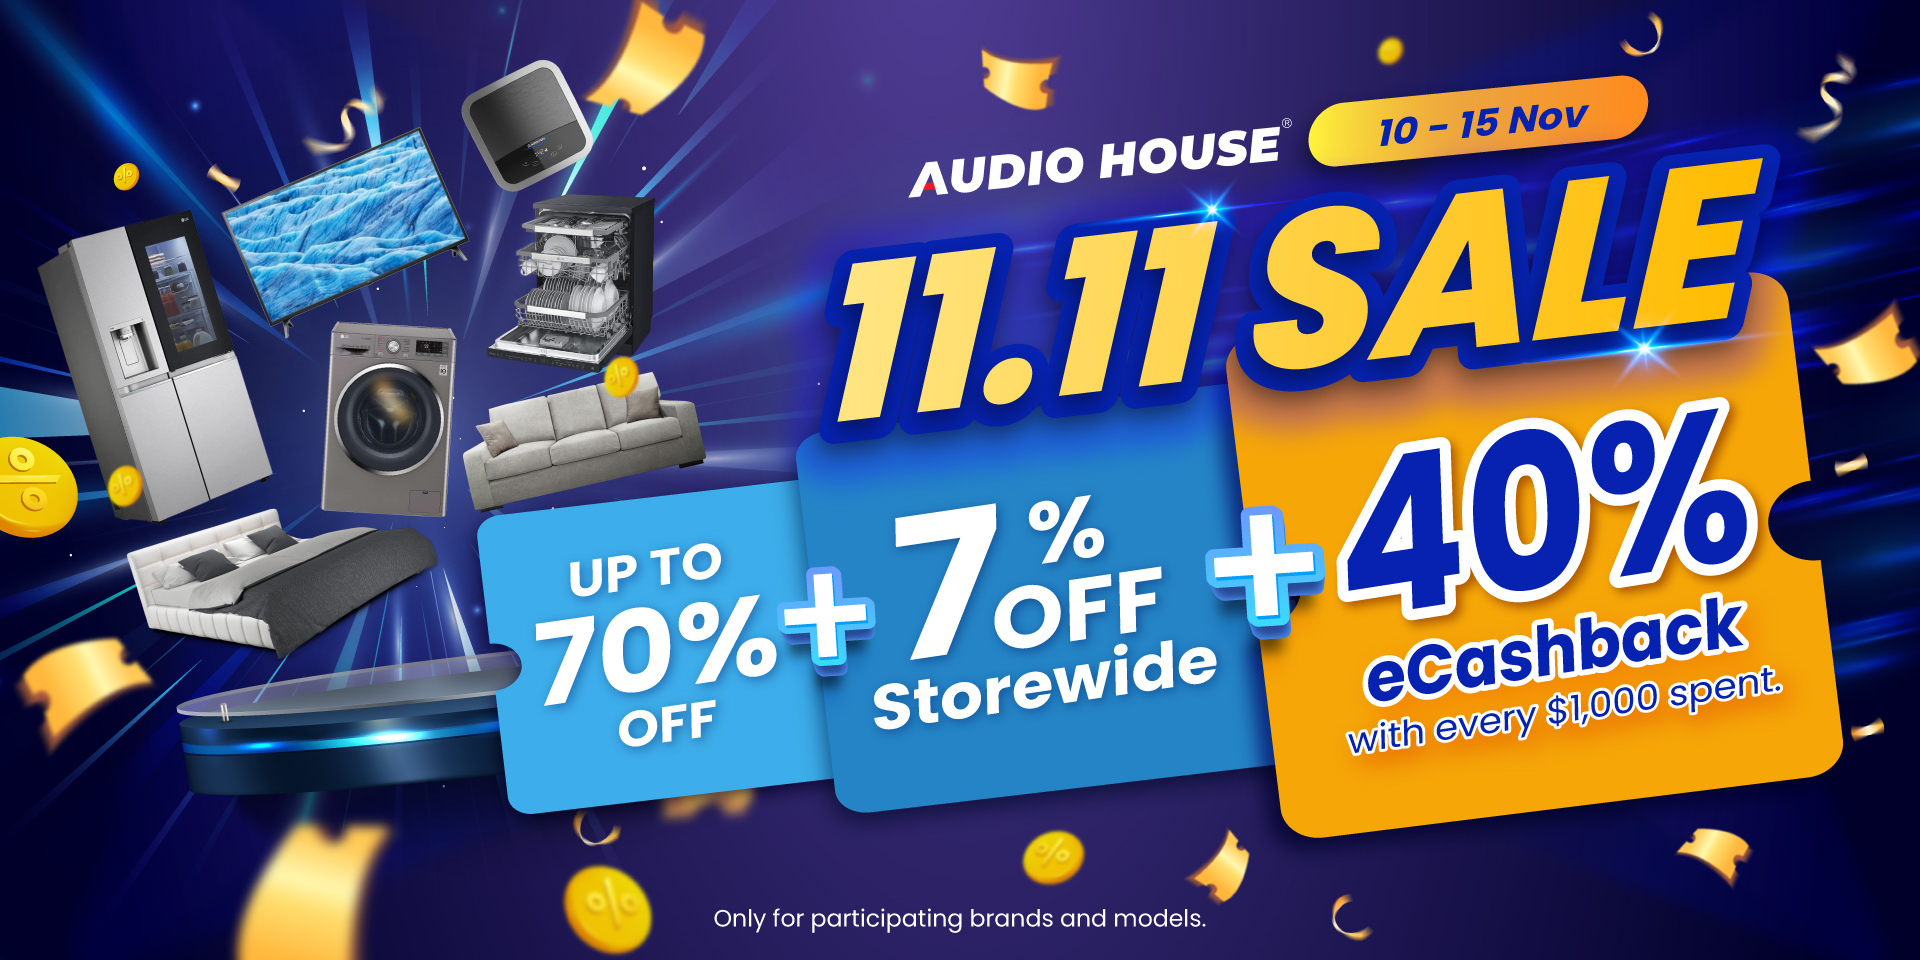 [Audio House 11.11 Sale] Get Up To 70% OFF All Electronics + 7% OFF Storewide + 40% eCashback!